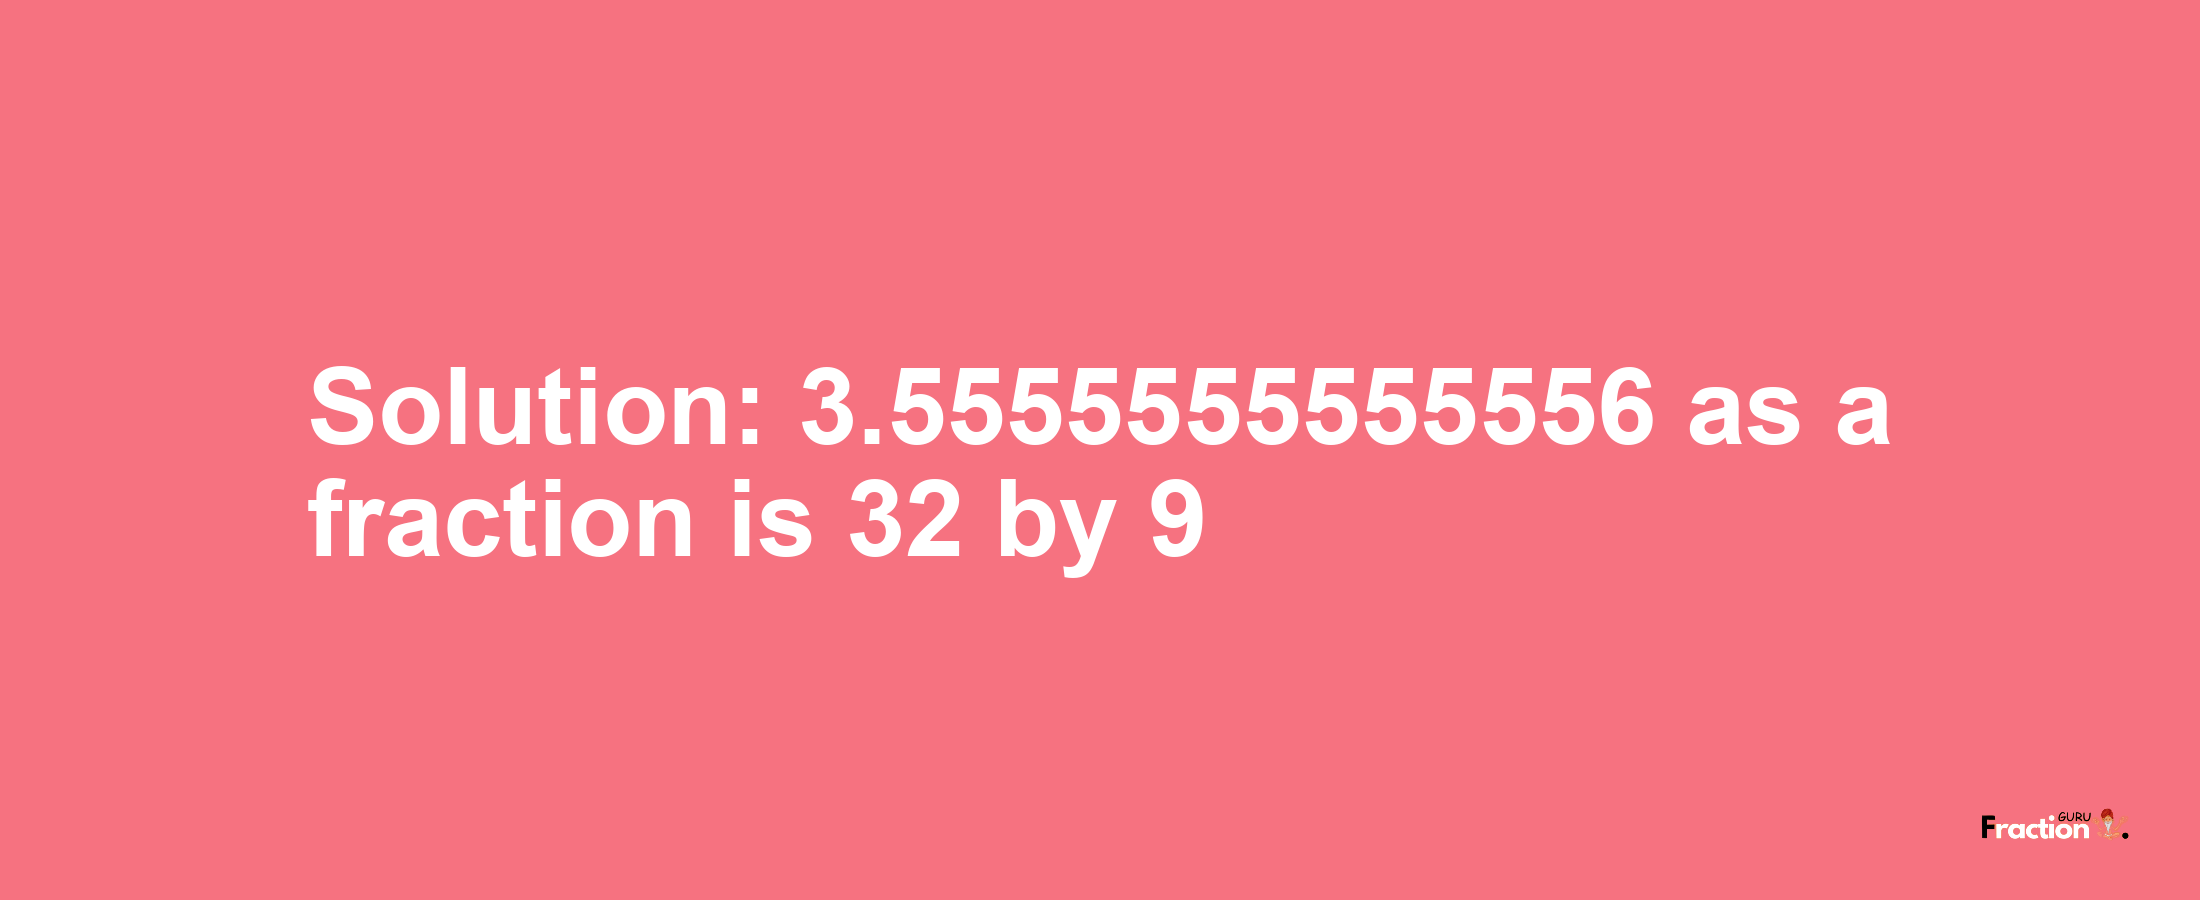 Solution:3.5555555555556 as a fraction is 32/9